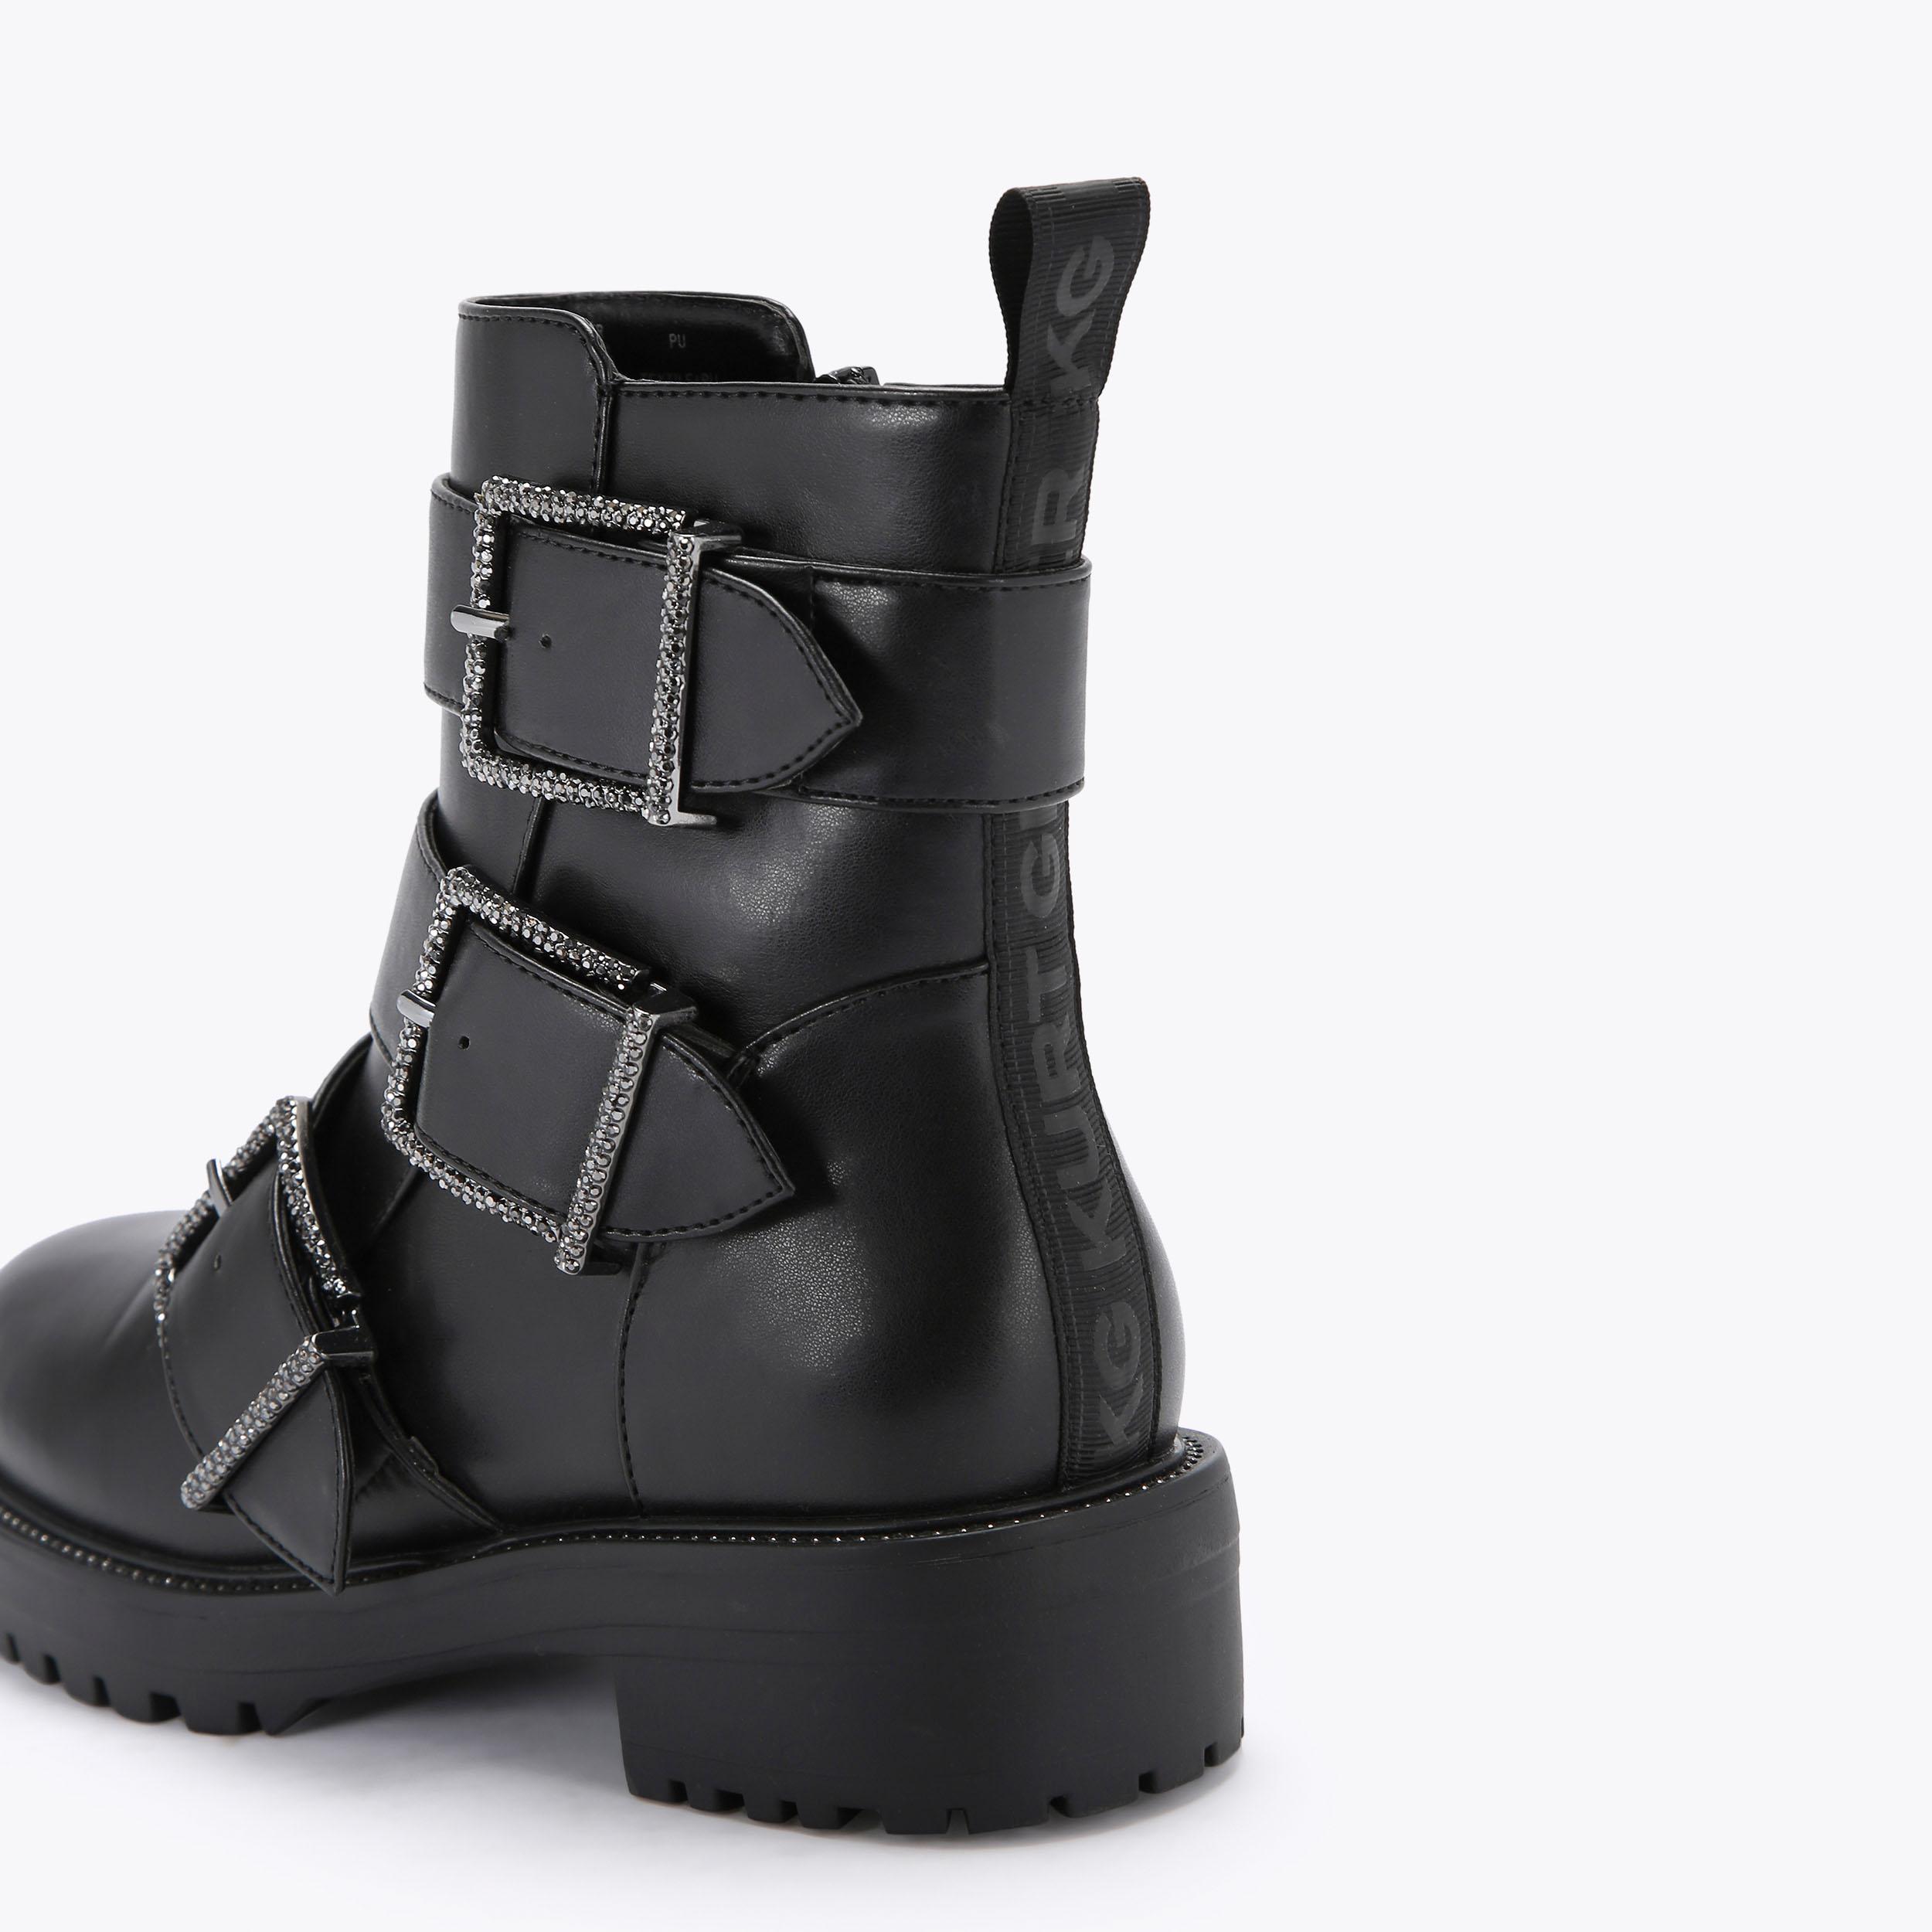 TRIXIE2 Black Buckled Ankle Boots by KG KURT GEIGER